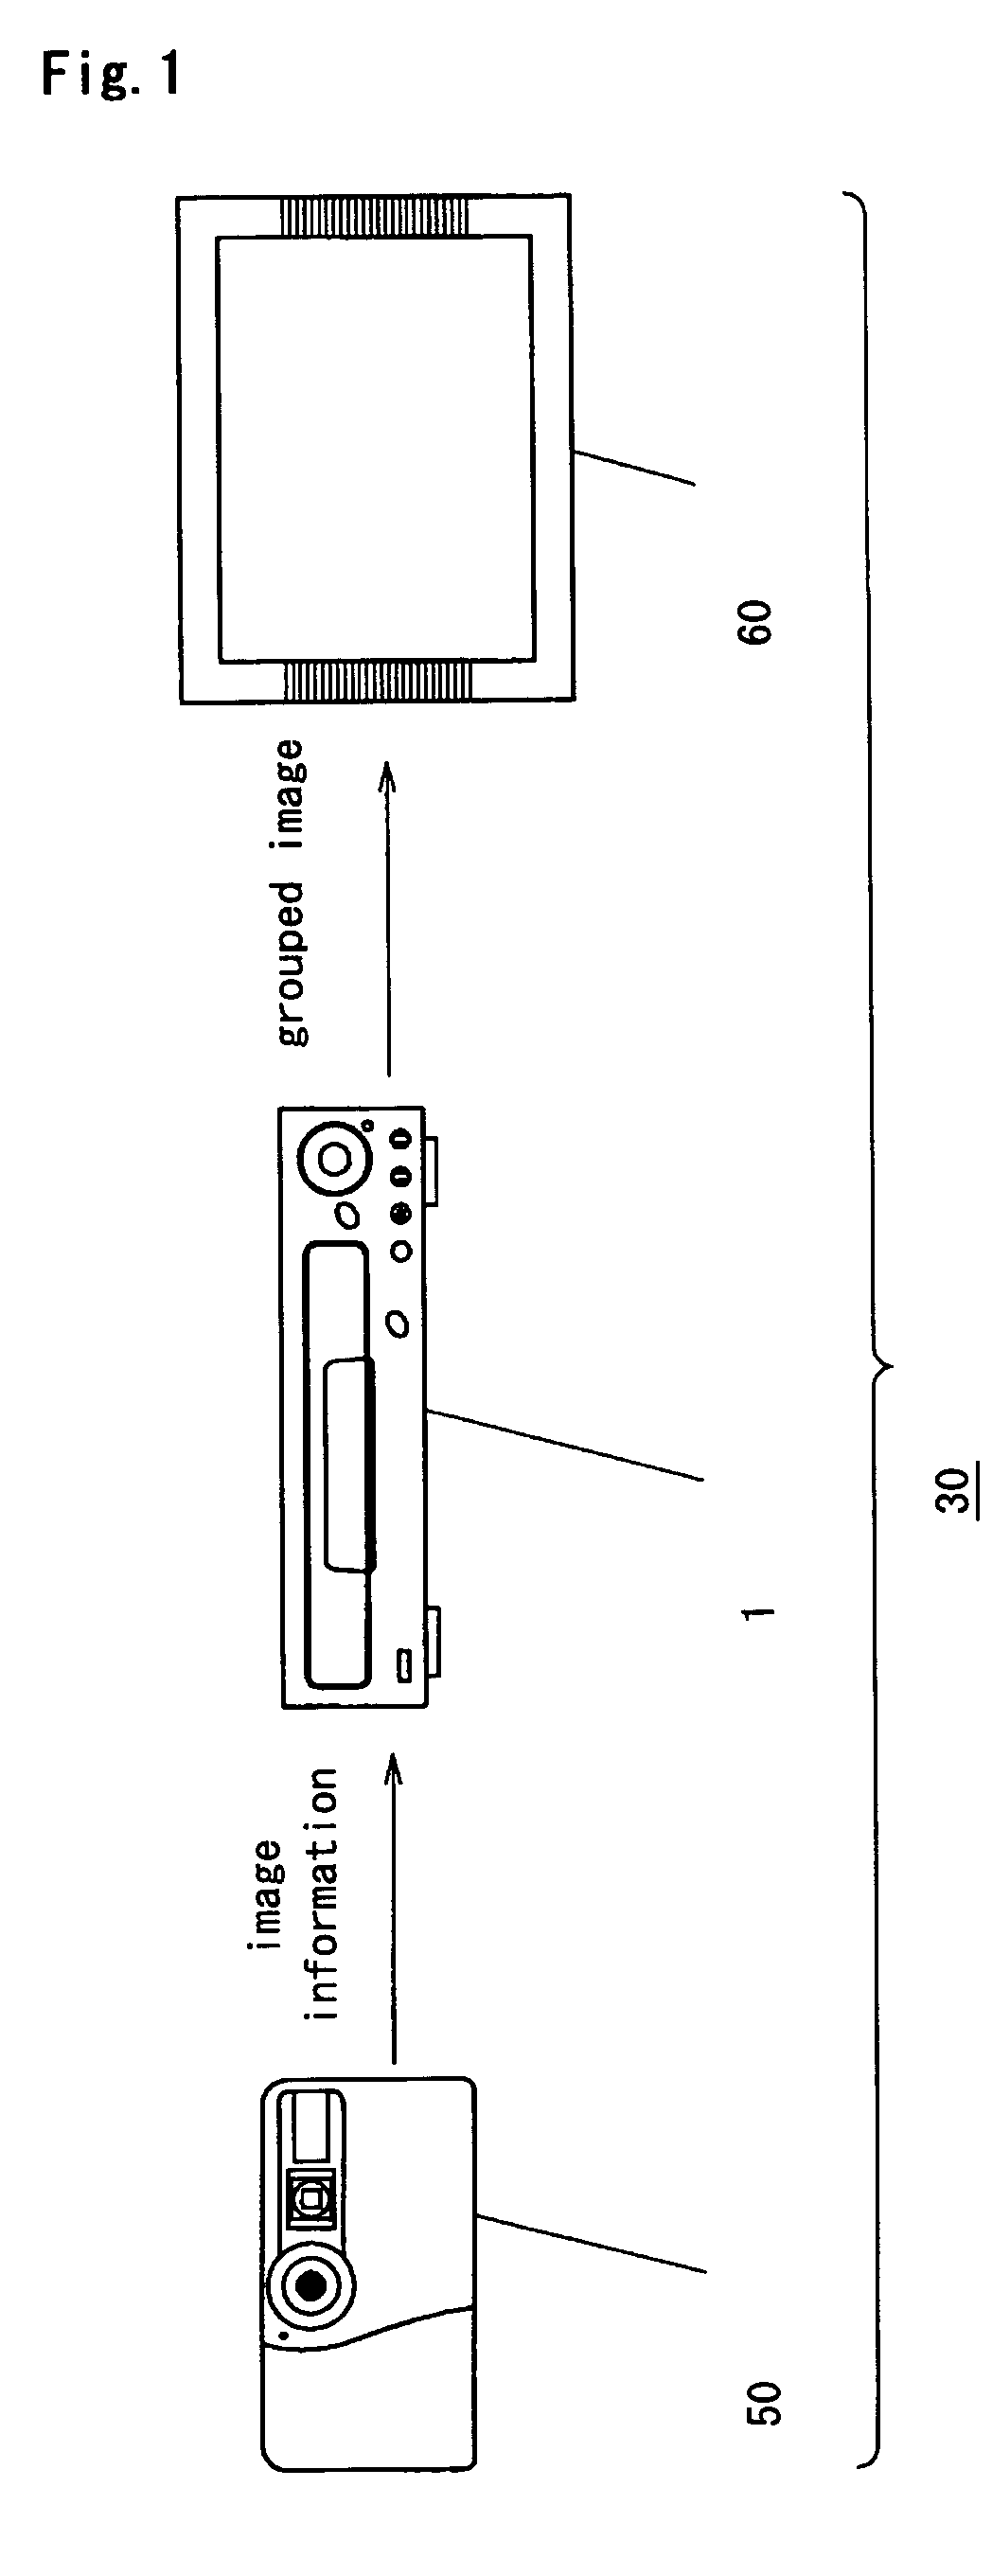 Apparatus and method for image-classifying, and recording medium storing computer-readable program for the same